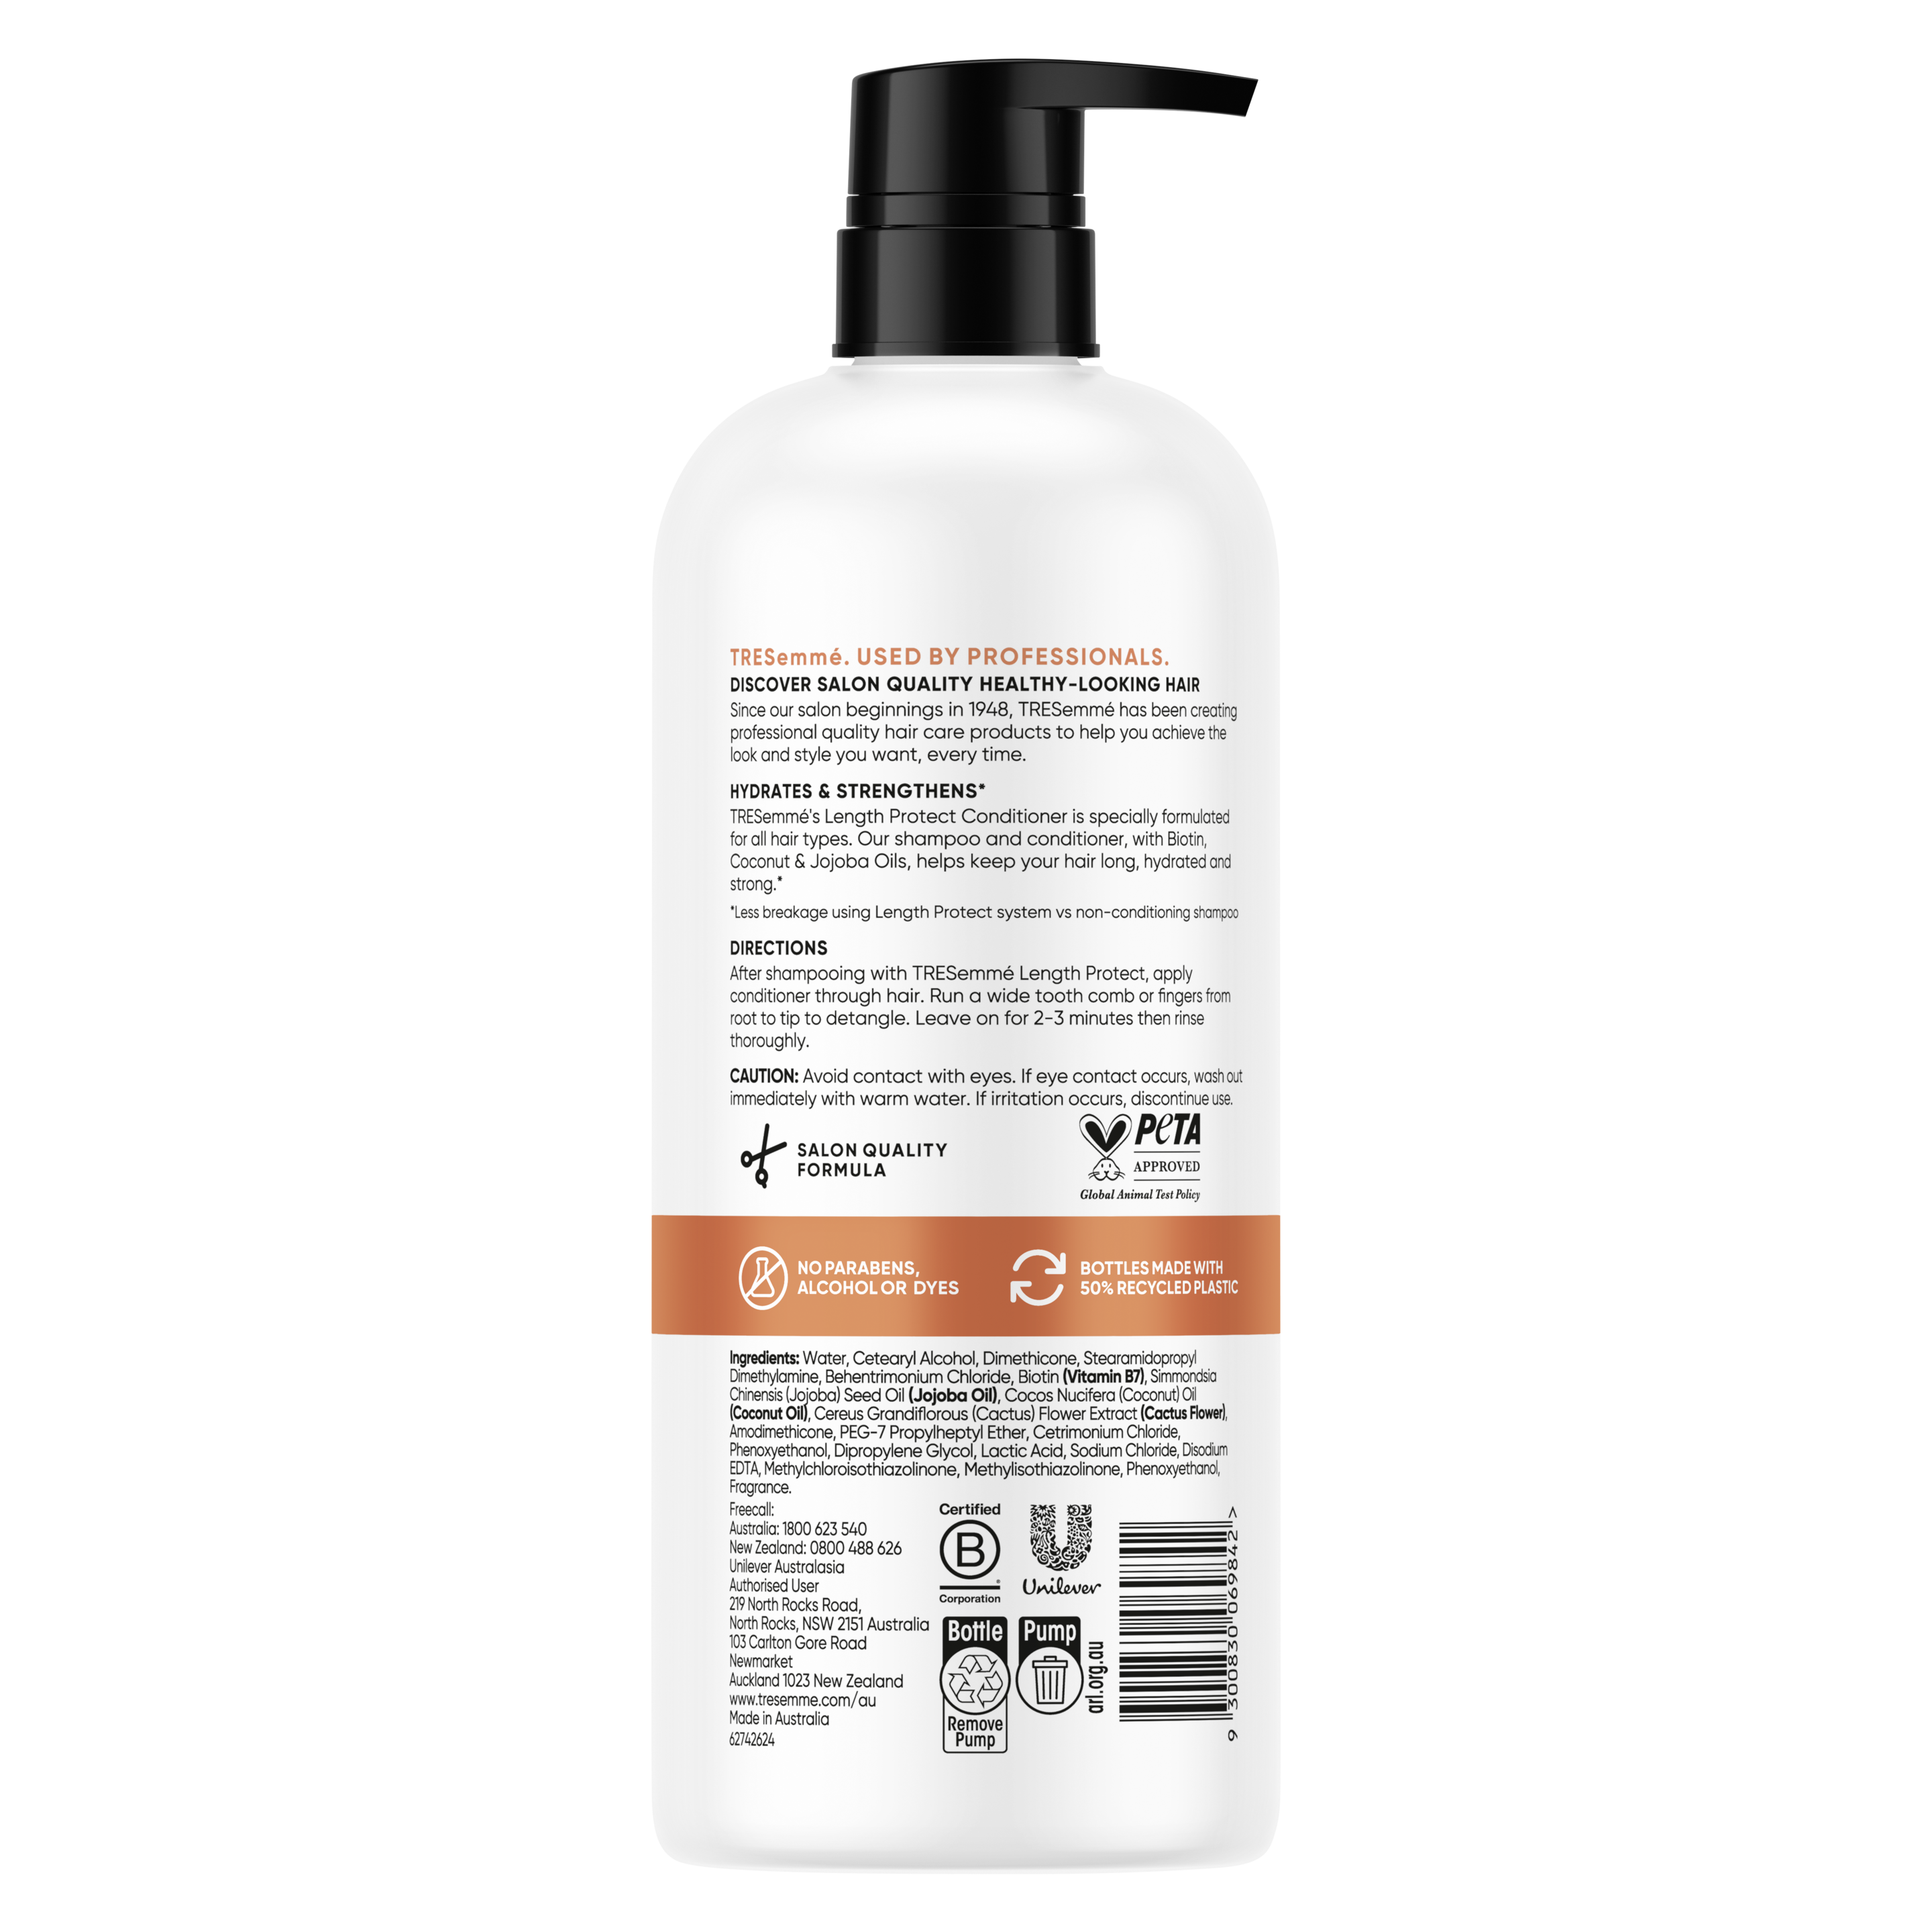 Length Protect Conditioner